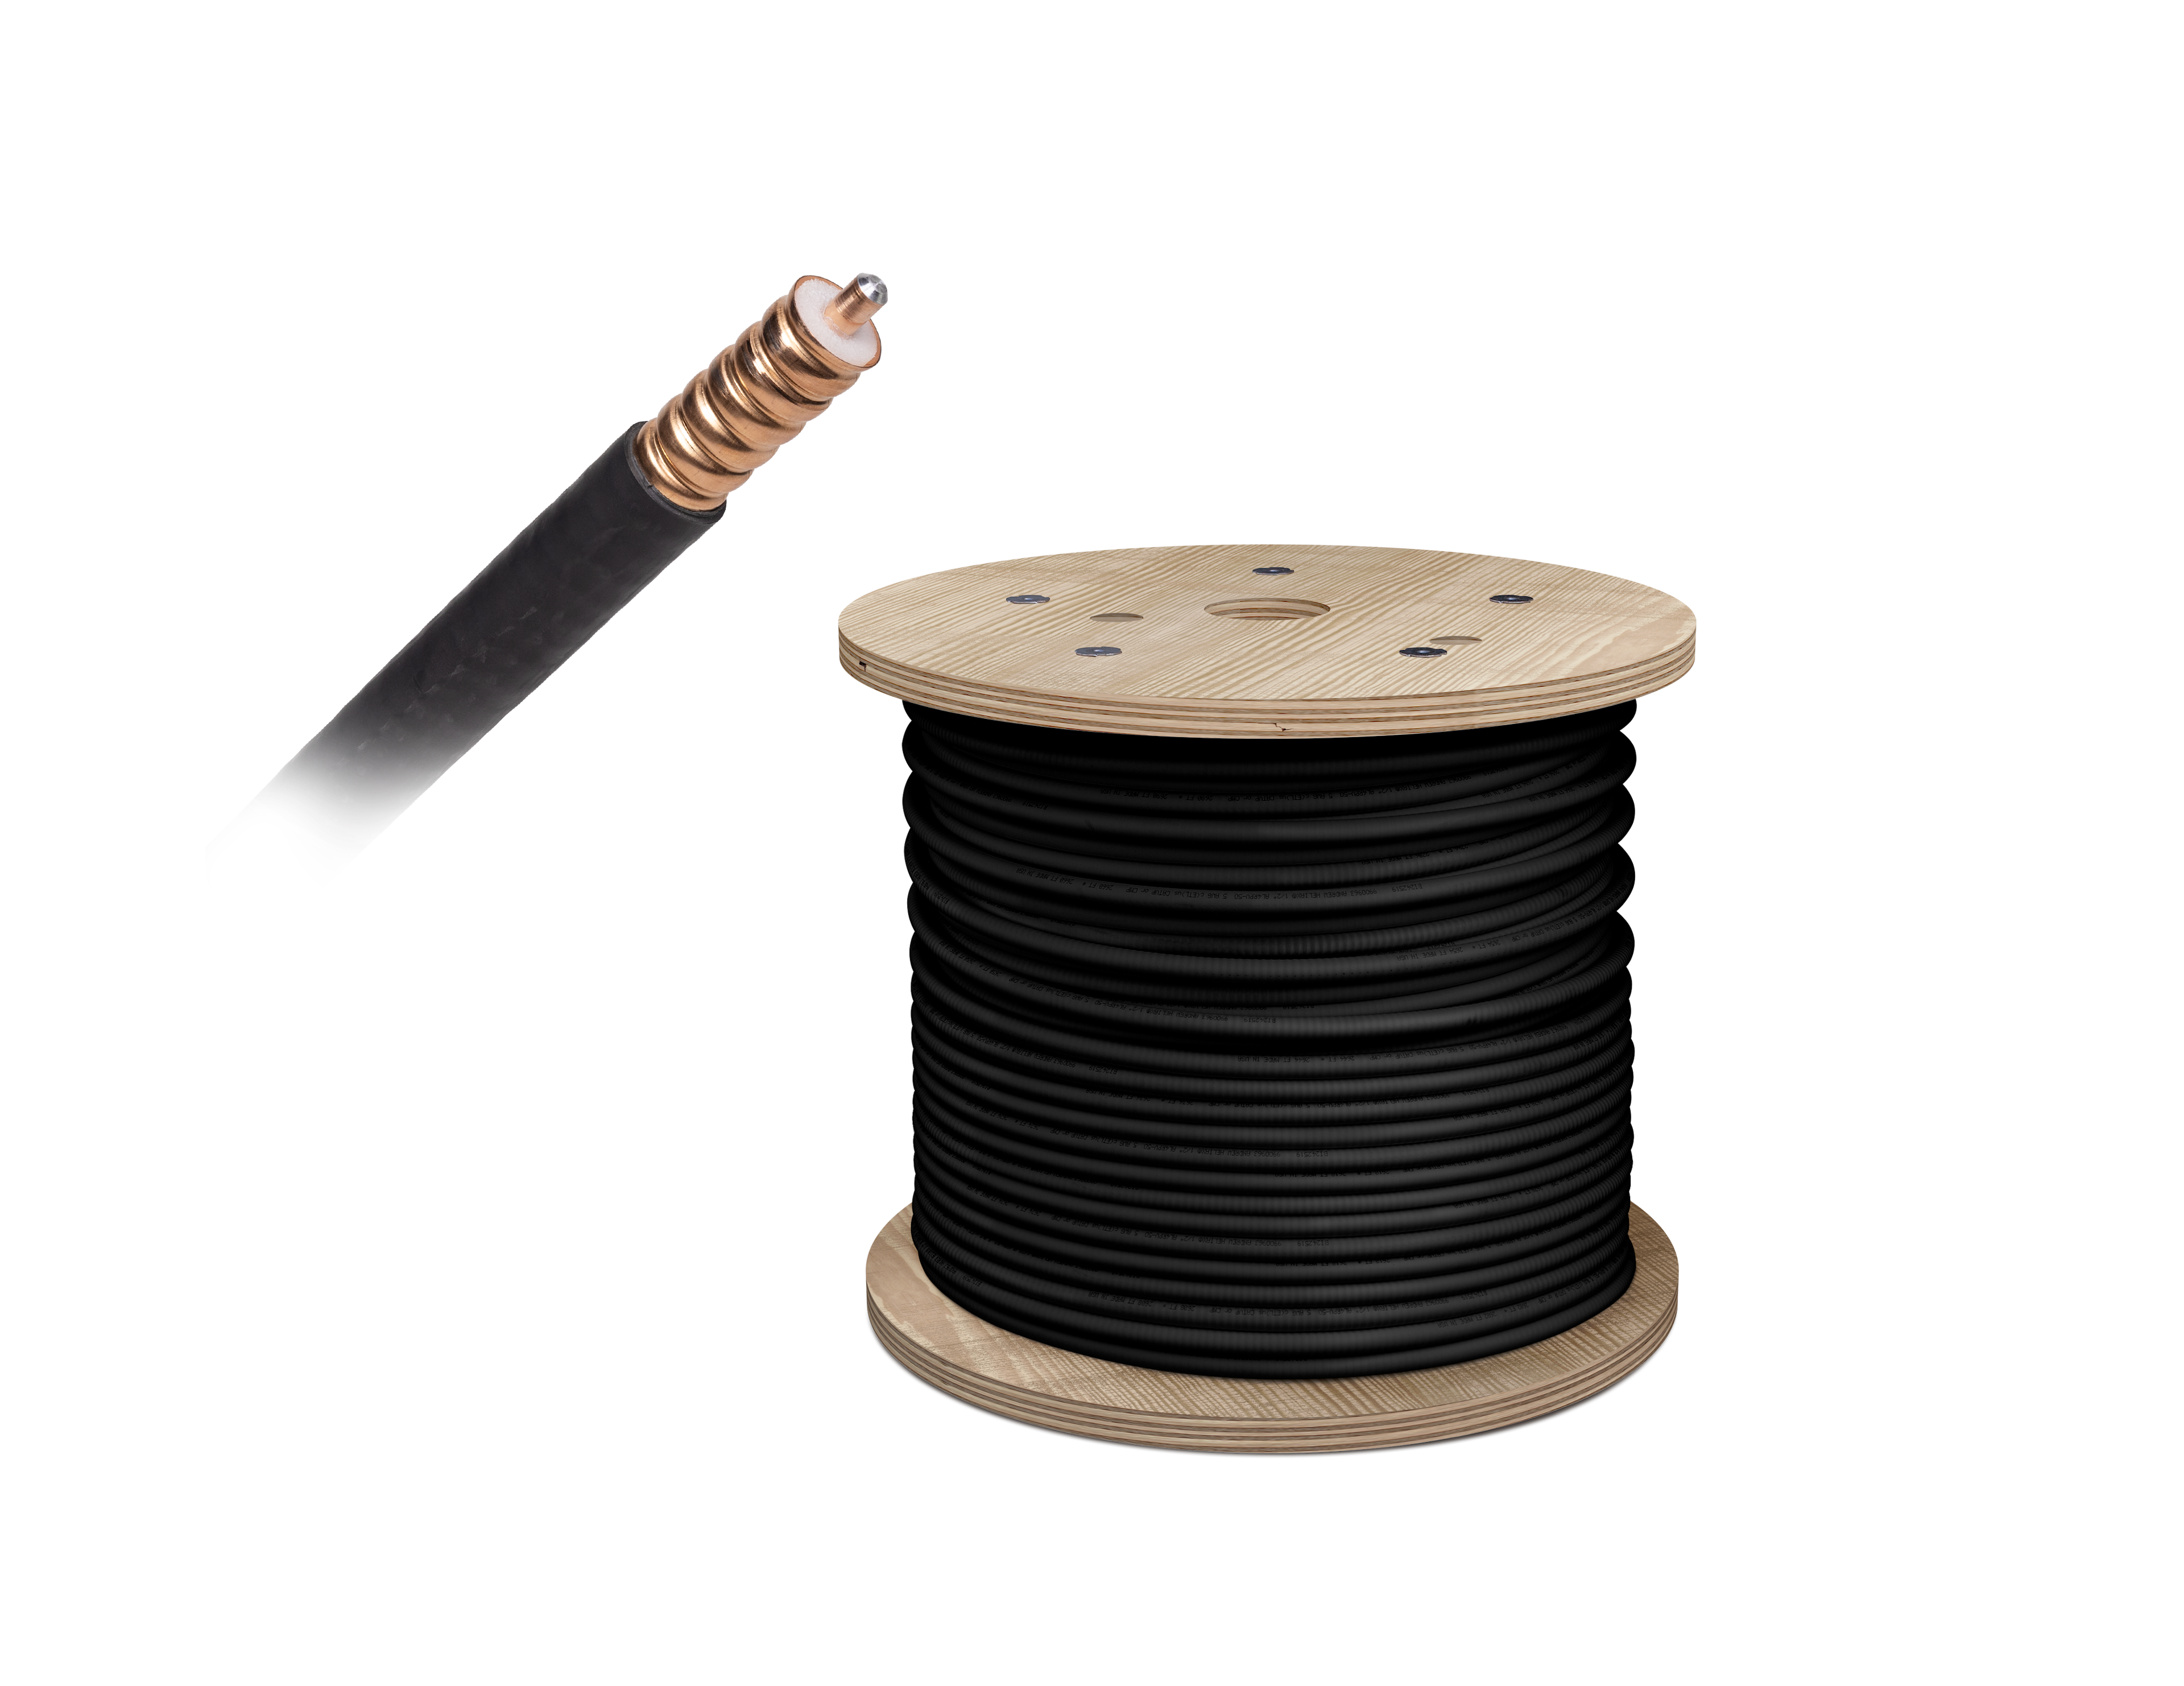 ½ in. coaxial cable